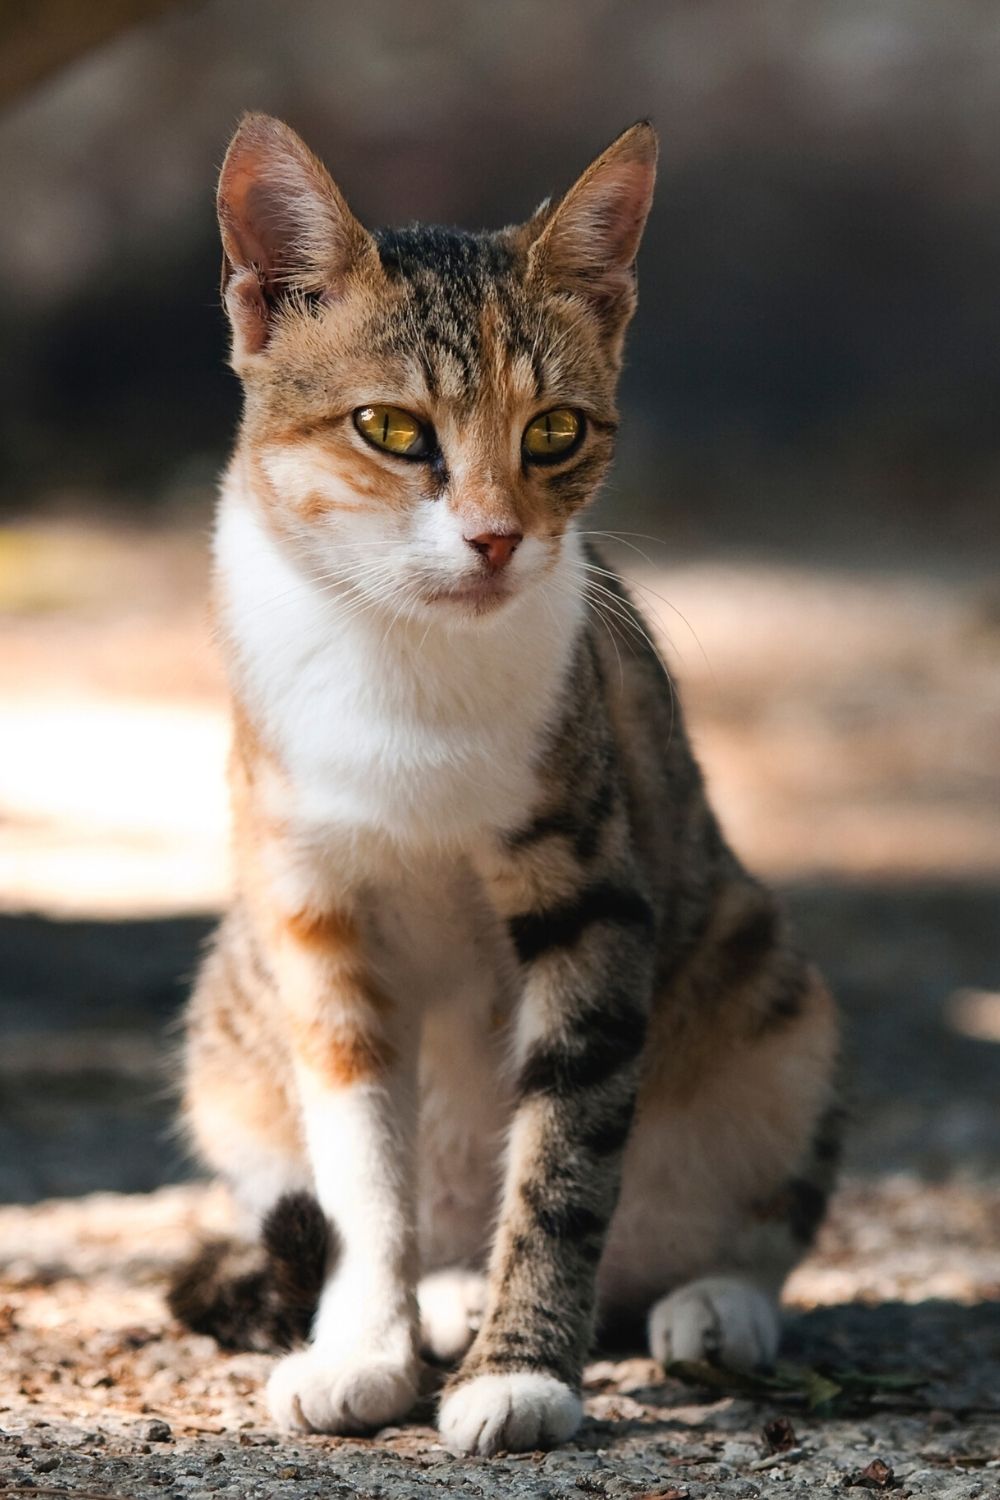 Lost and stray cats have lower lifespans compared to domesticated cats